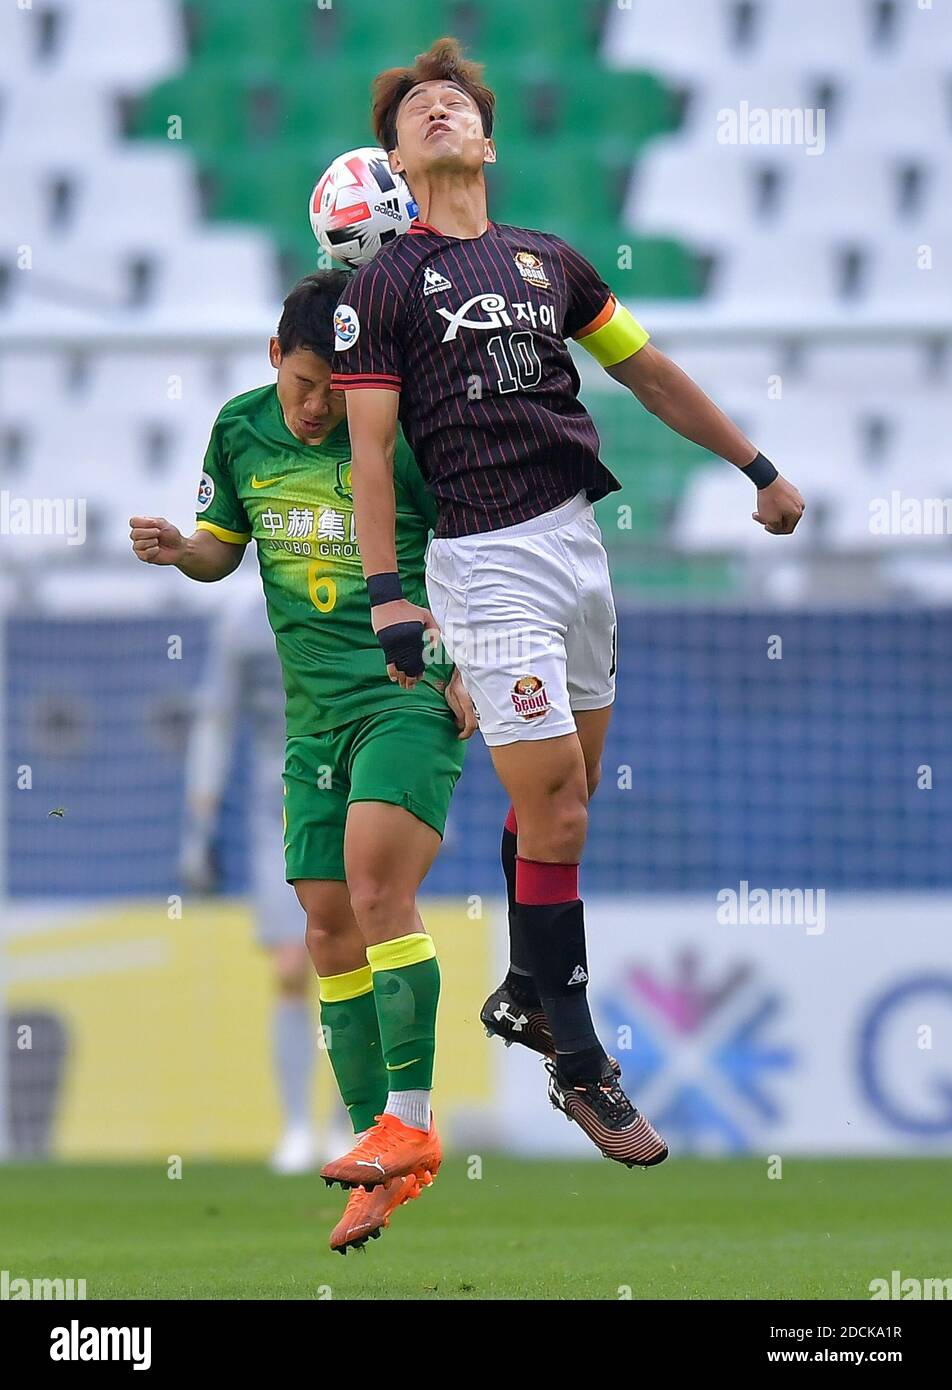 Doha, Qatar. 21st Nov, 2020. Park Chu-Young (R) of FC Seoul vies with Chi Zhongguo of Beijing FC during the group E match between FC Seoul of South Korea and Beijing FC of China at the AFC Champions League 2020 in Doha, capital of Qatar, Nov. 21, 2020. Credit: Nikku/Xinhua/Alamy Live News Stock Photo